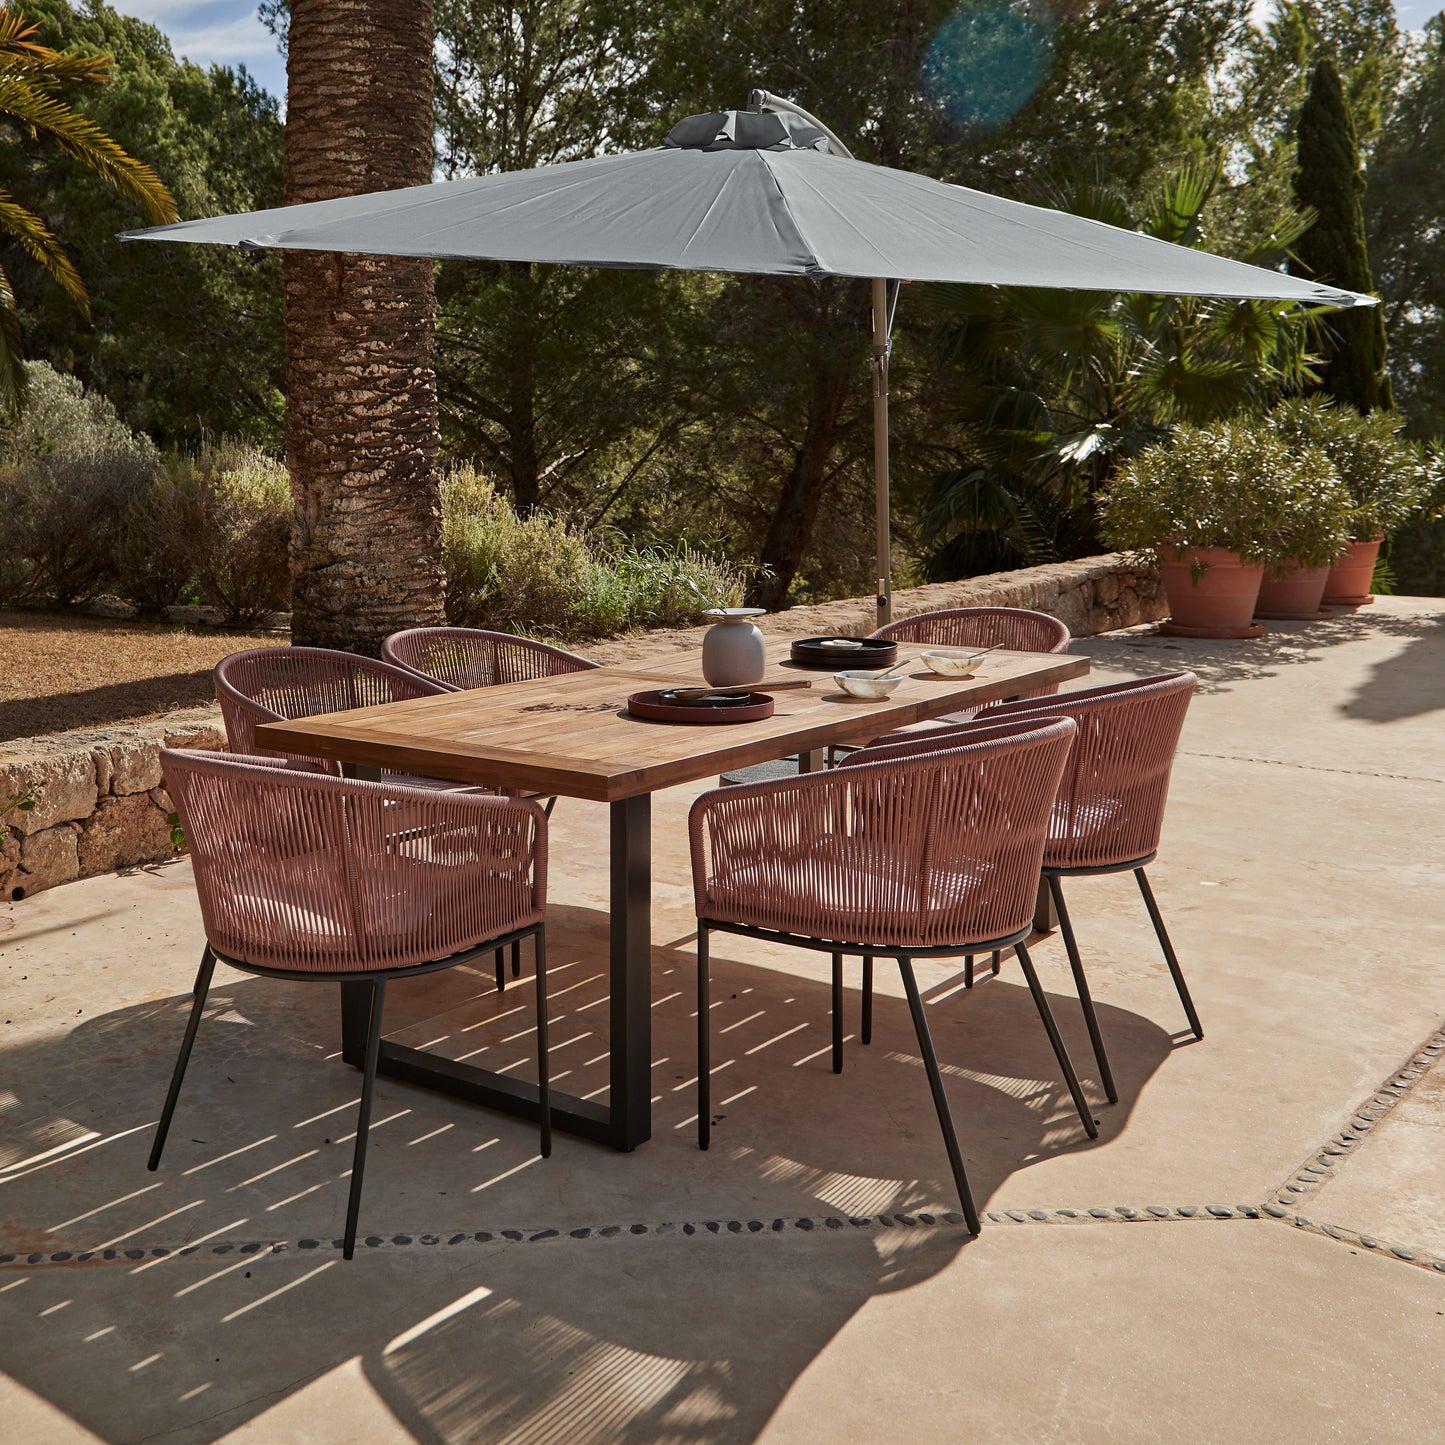 Hali 6 Seater Wooden Outdoor Dining Set with Hali Pink Chairs & Grey Lean Over Parasol - 175cm